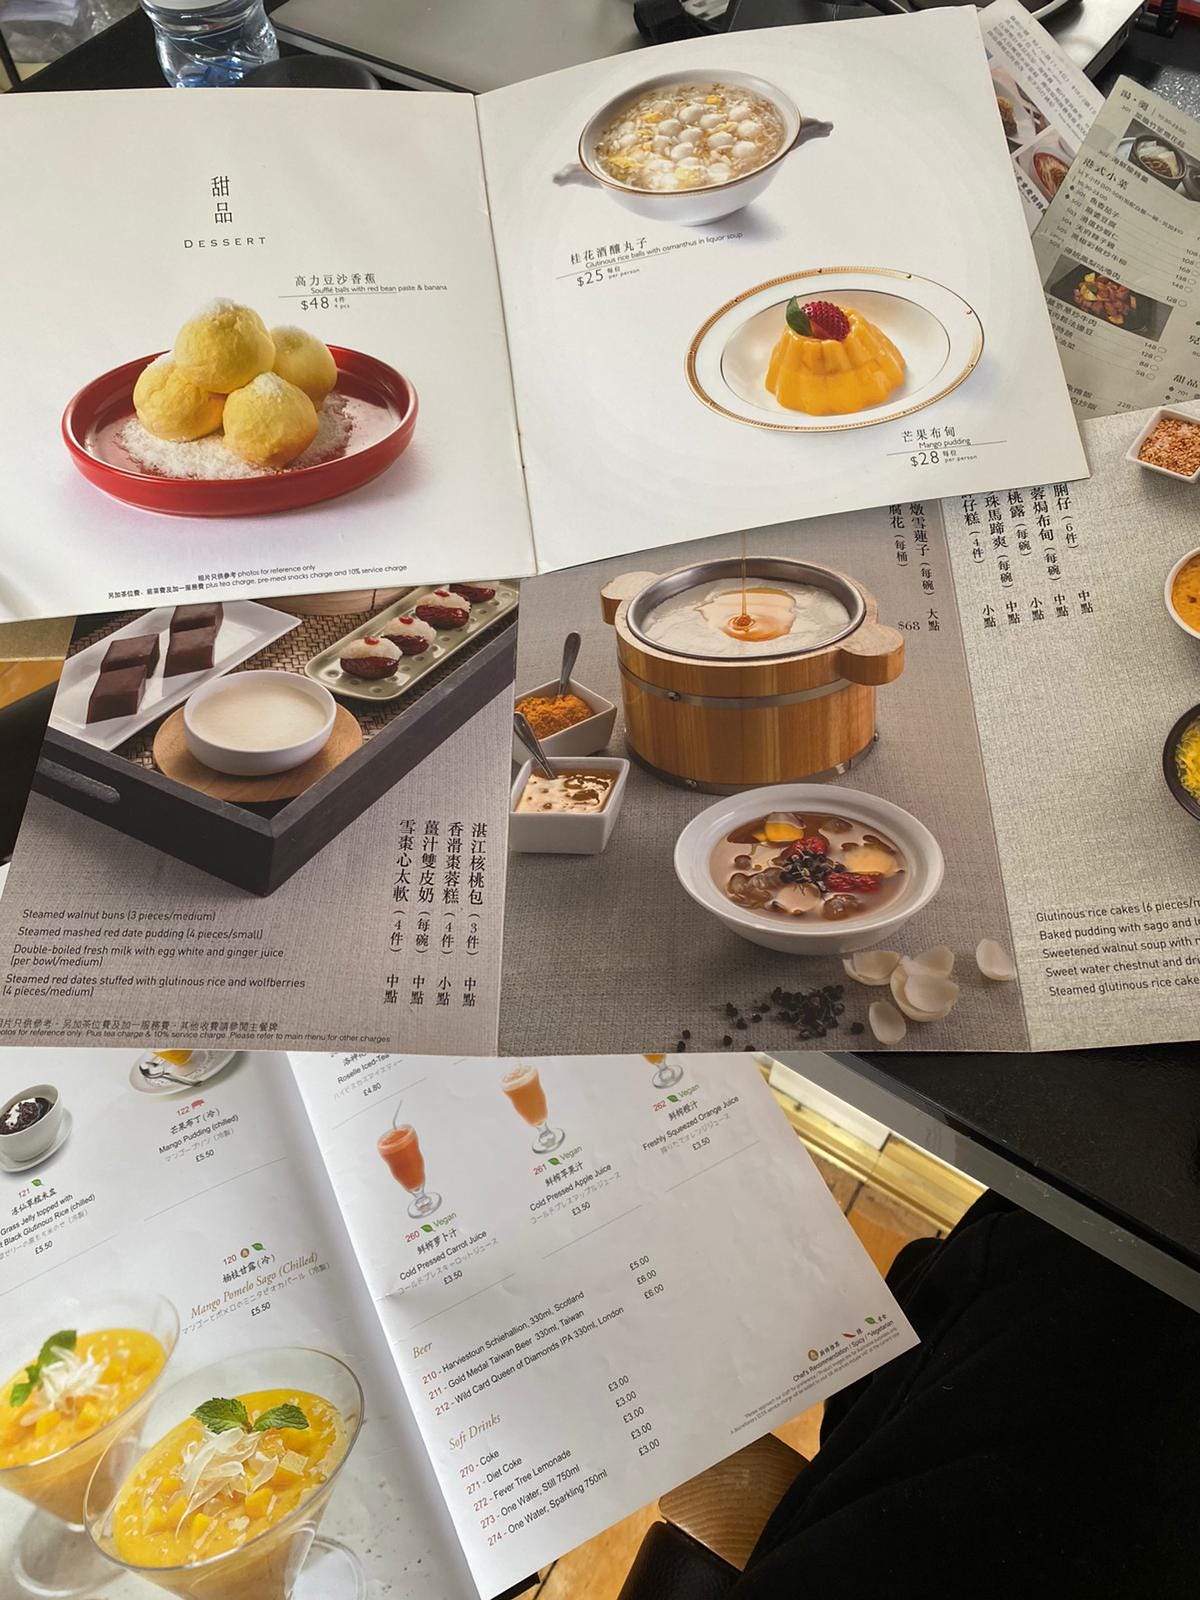 An overhead shot of several Hong Kong restaurant menus open to their dessert pages featuring photos and text